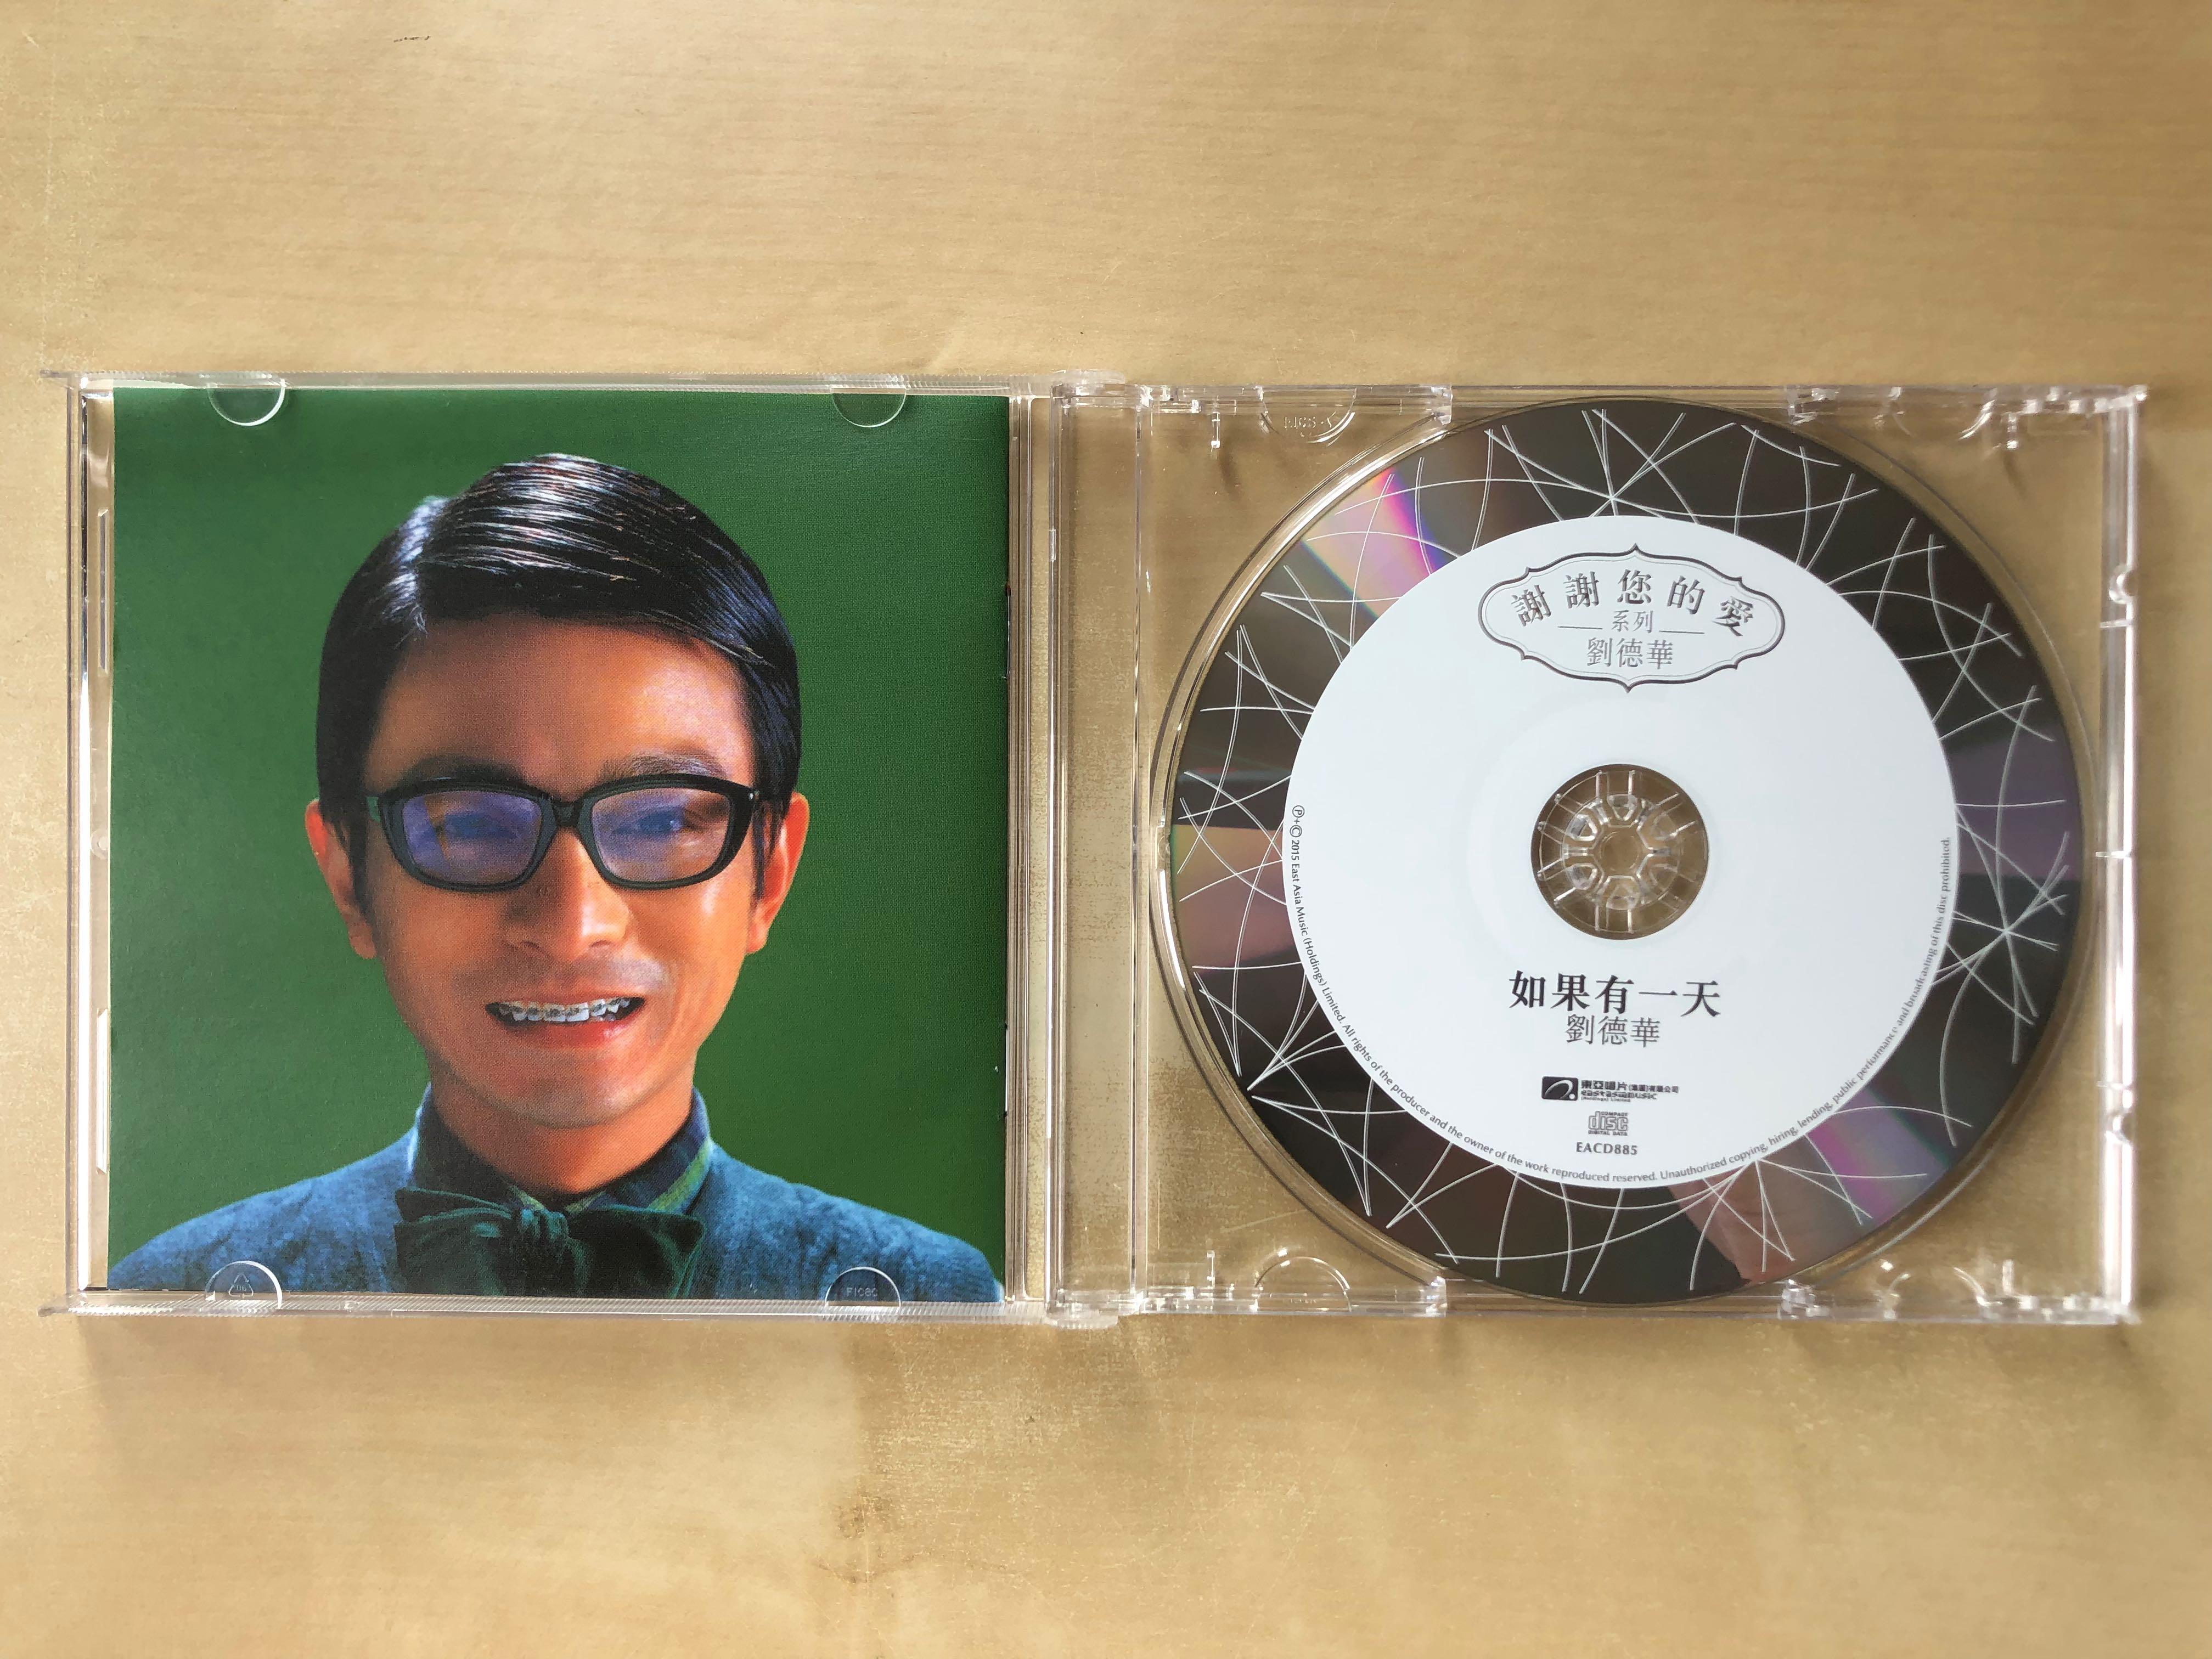 Cd丨劉德華如果有一天(謝謝您的愛系列) / Andy Lau If One Day.... (Thank You For Love Reissue  Series), 興趣及遊戲, 音樂、樂器& 配件, 音樂與媒體-